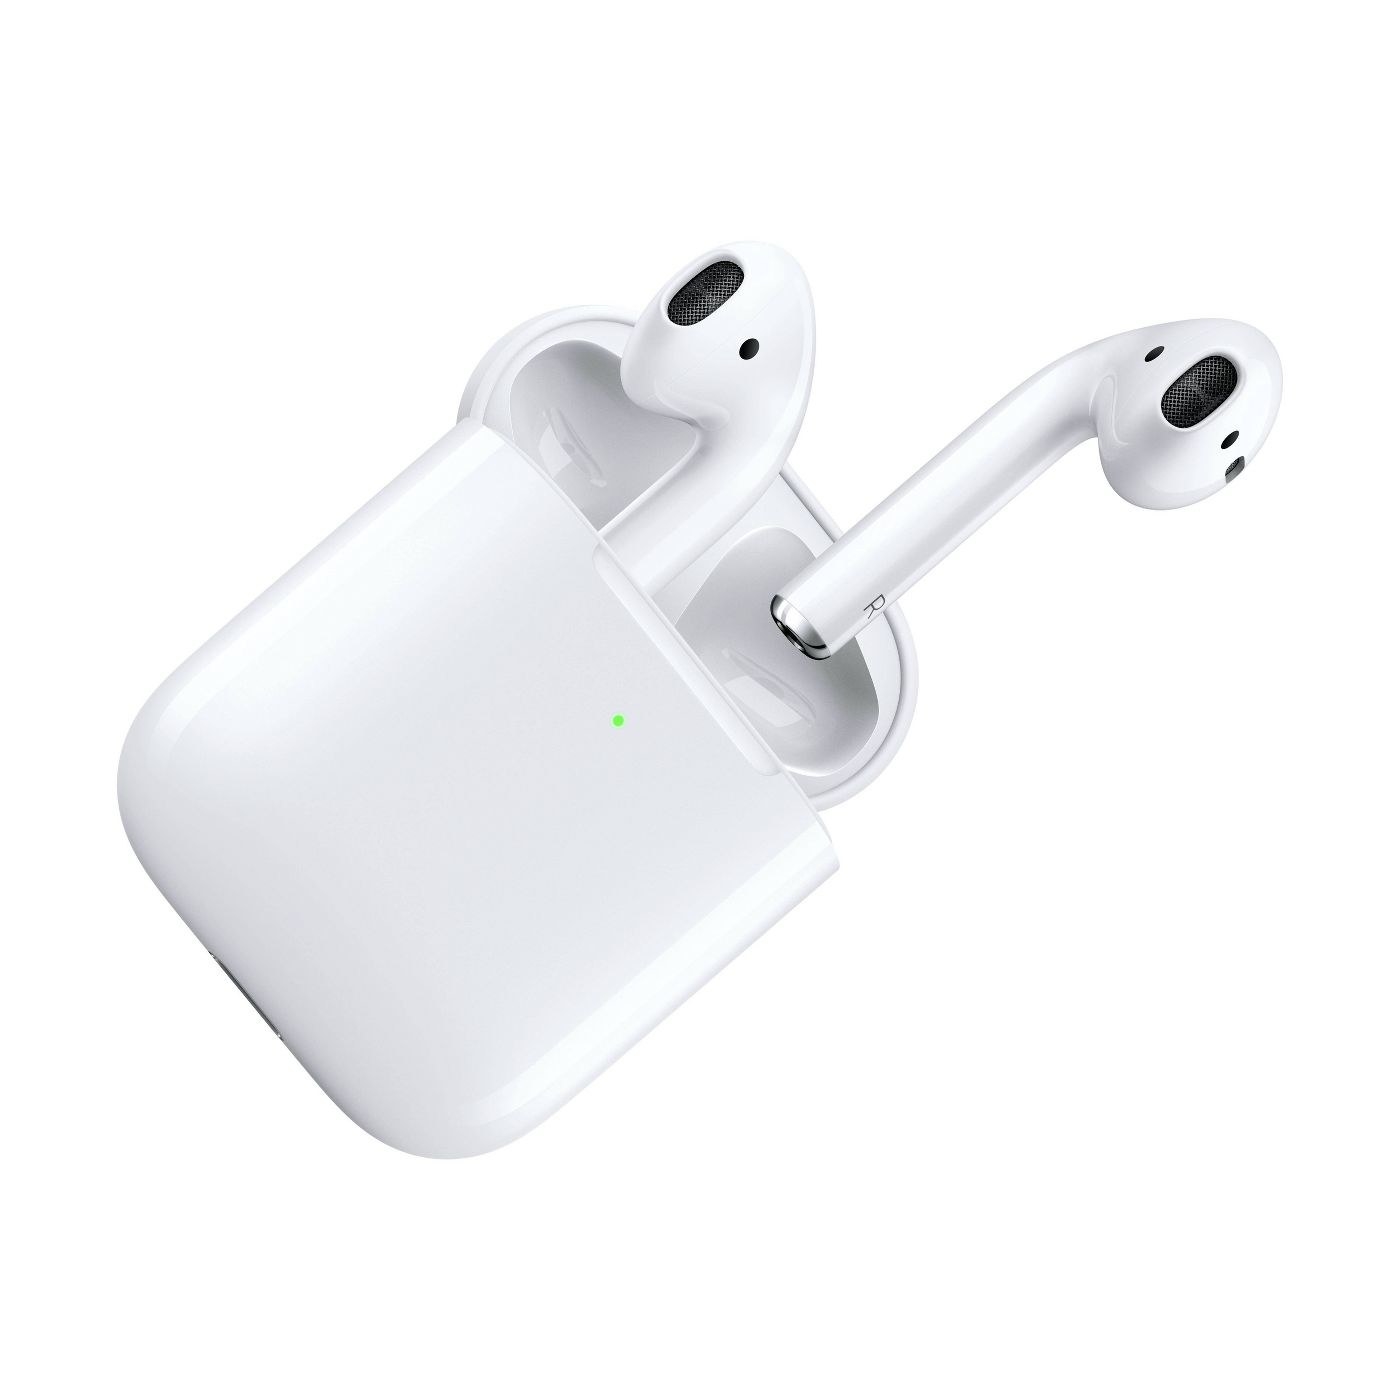 The AirPods